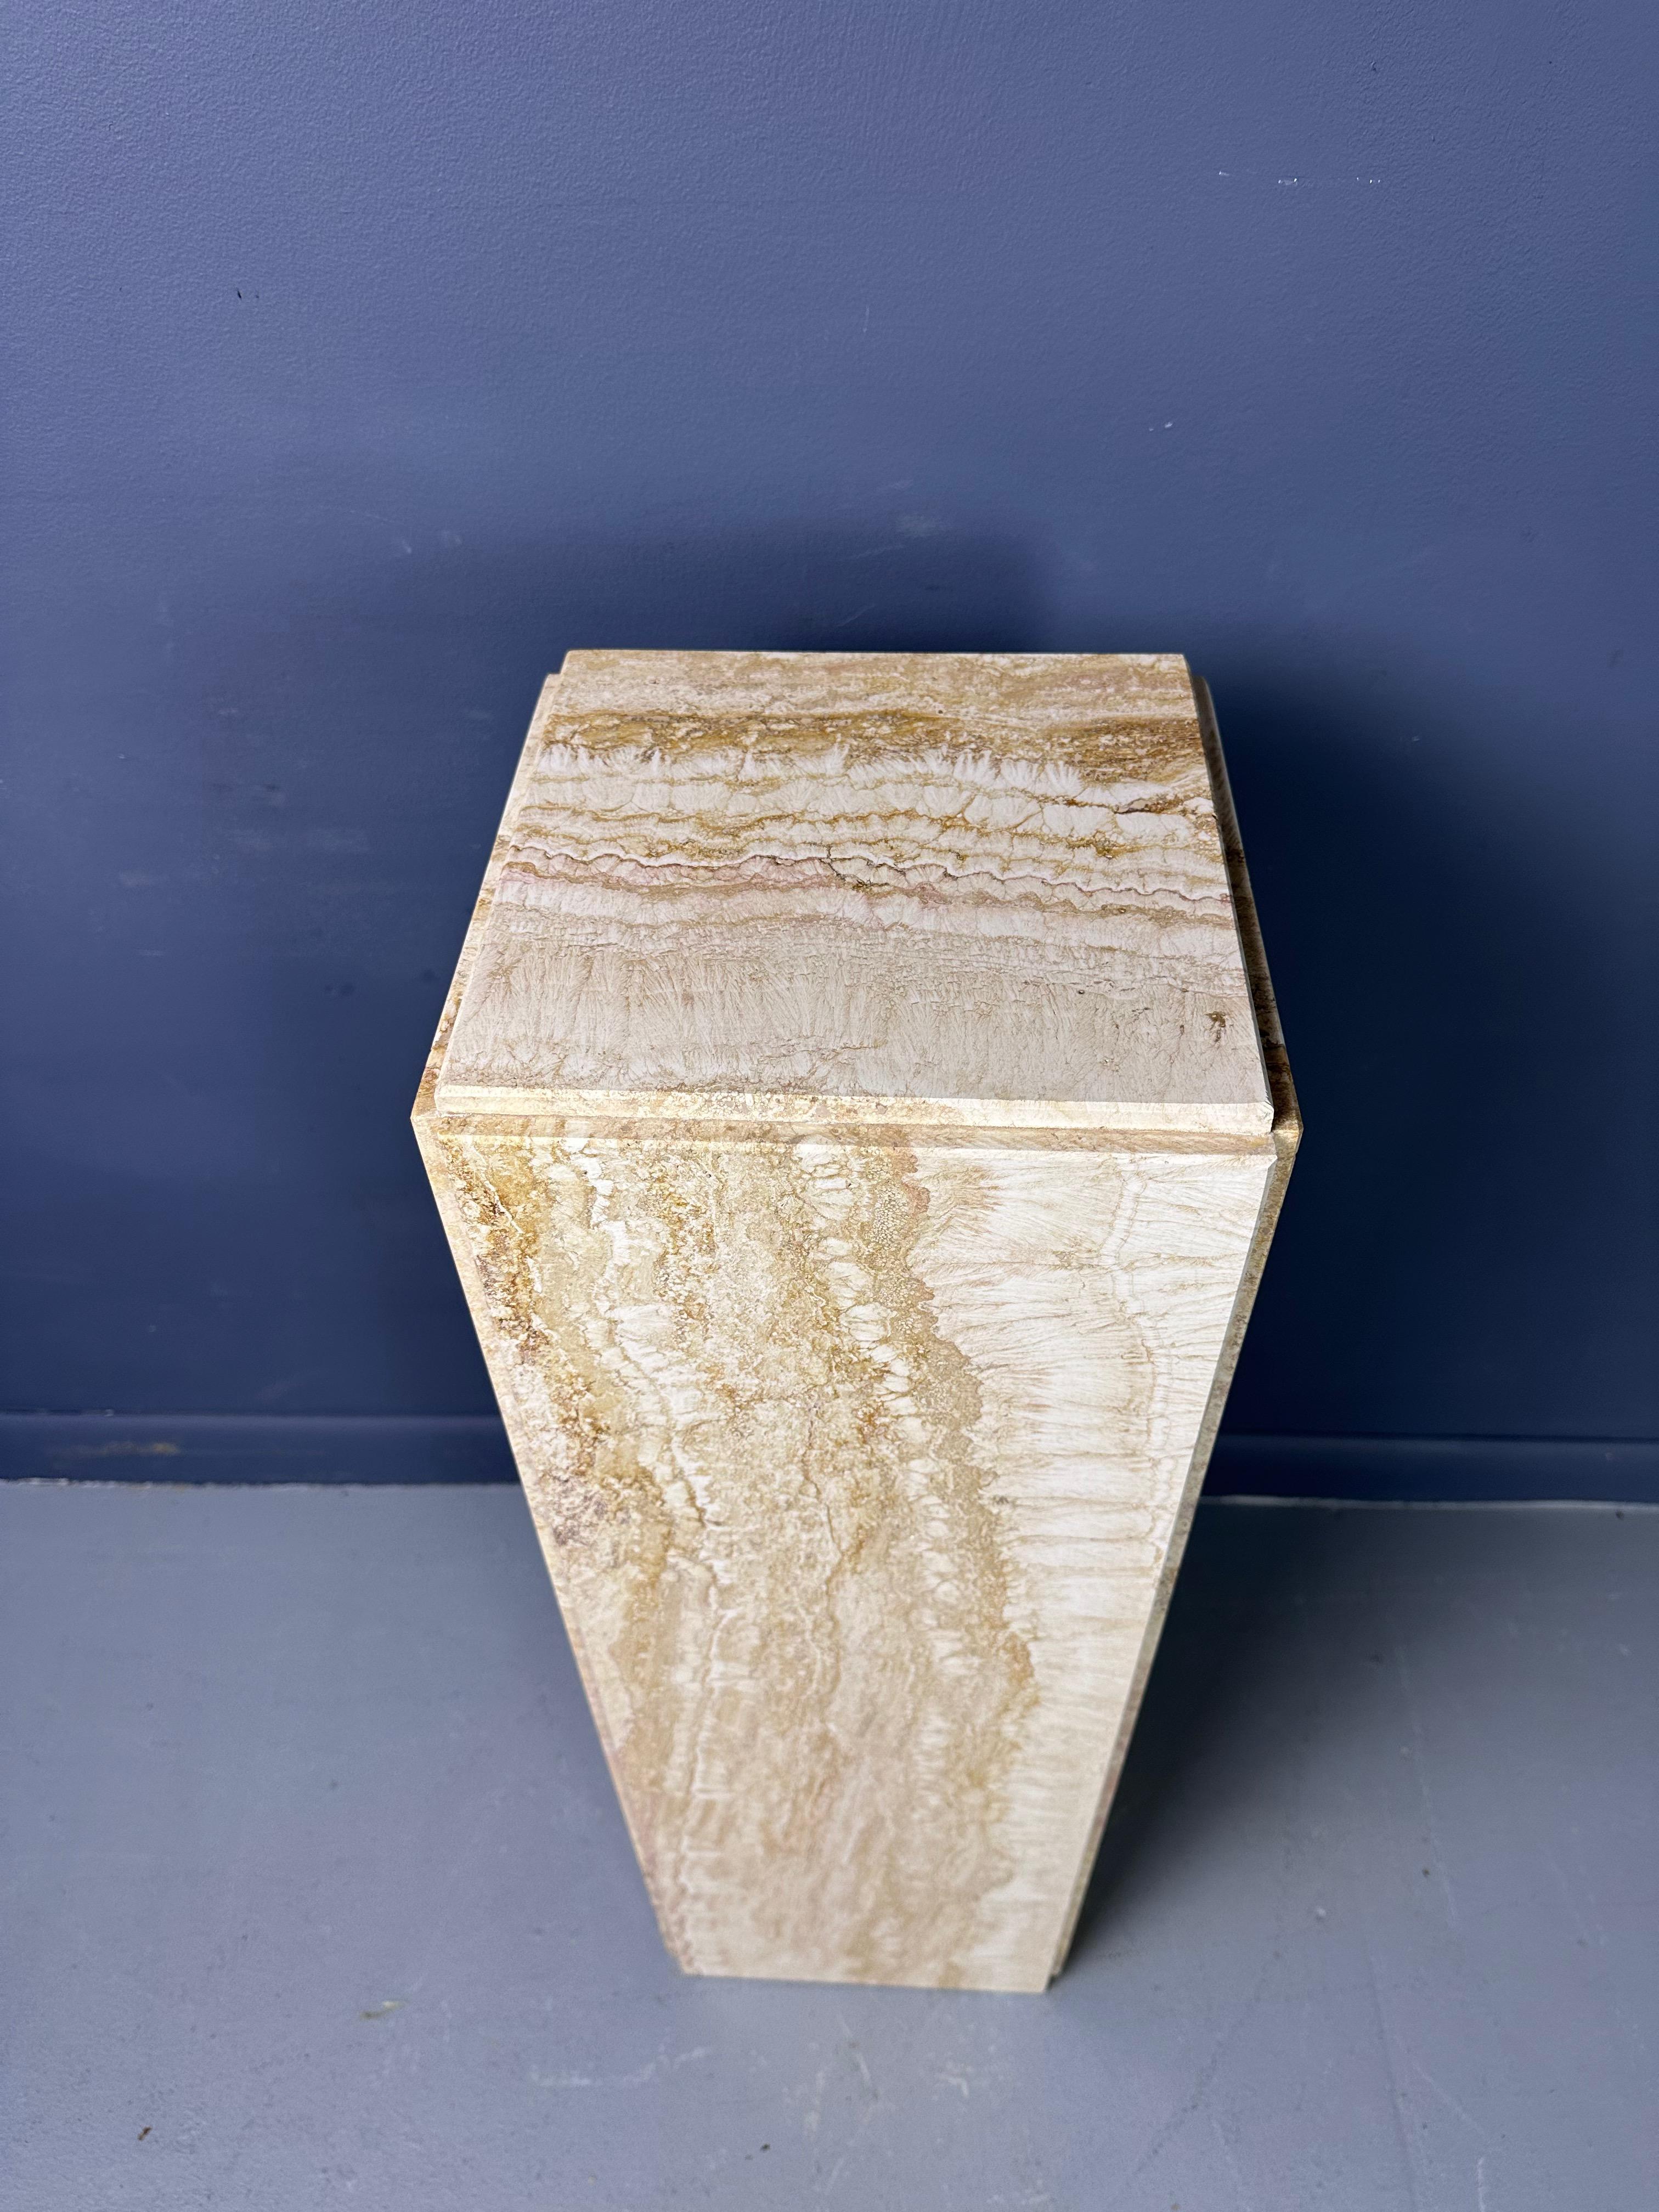 A fine Mid-Century Modern Italian travertine pedastal. With chamfered panels to each side, a rich variegation to the stone, and a smooth polished surface. This piece will certainly compliment any piece of statuary of plant you might want to place on